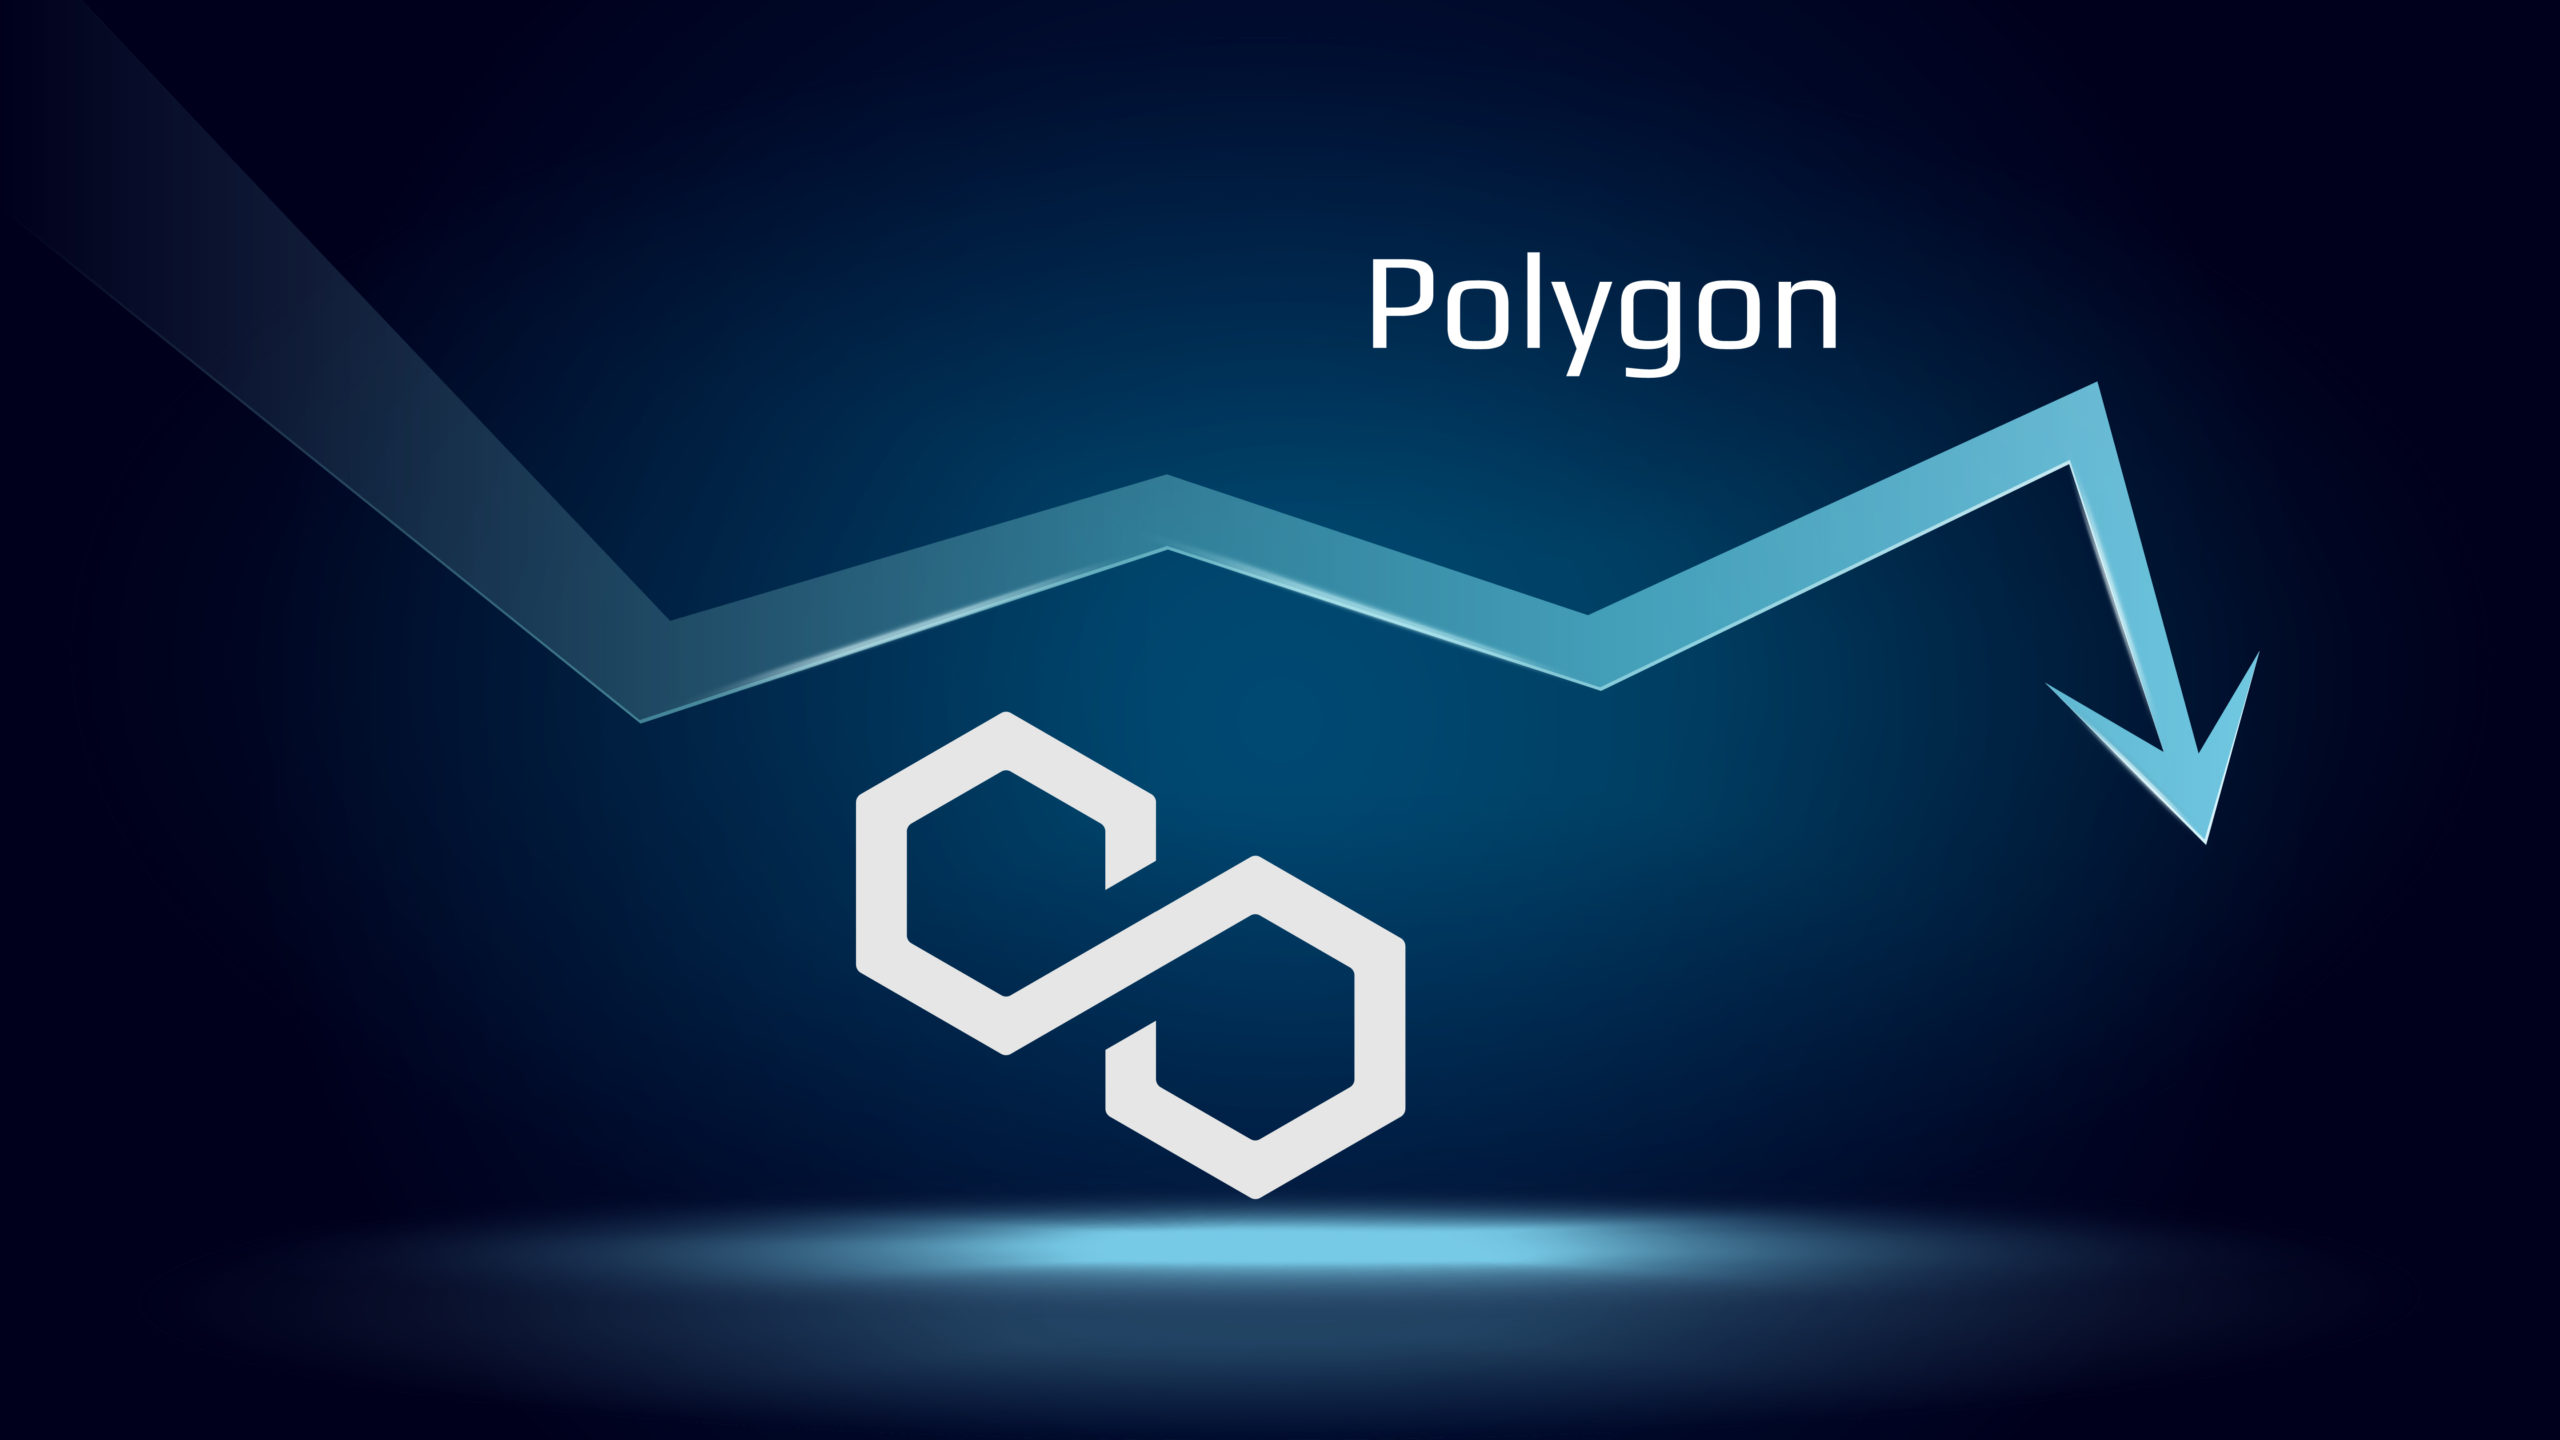 How To Invest In Polygon (Matic) and Is It Too Late?